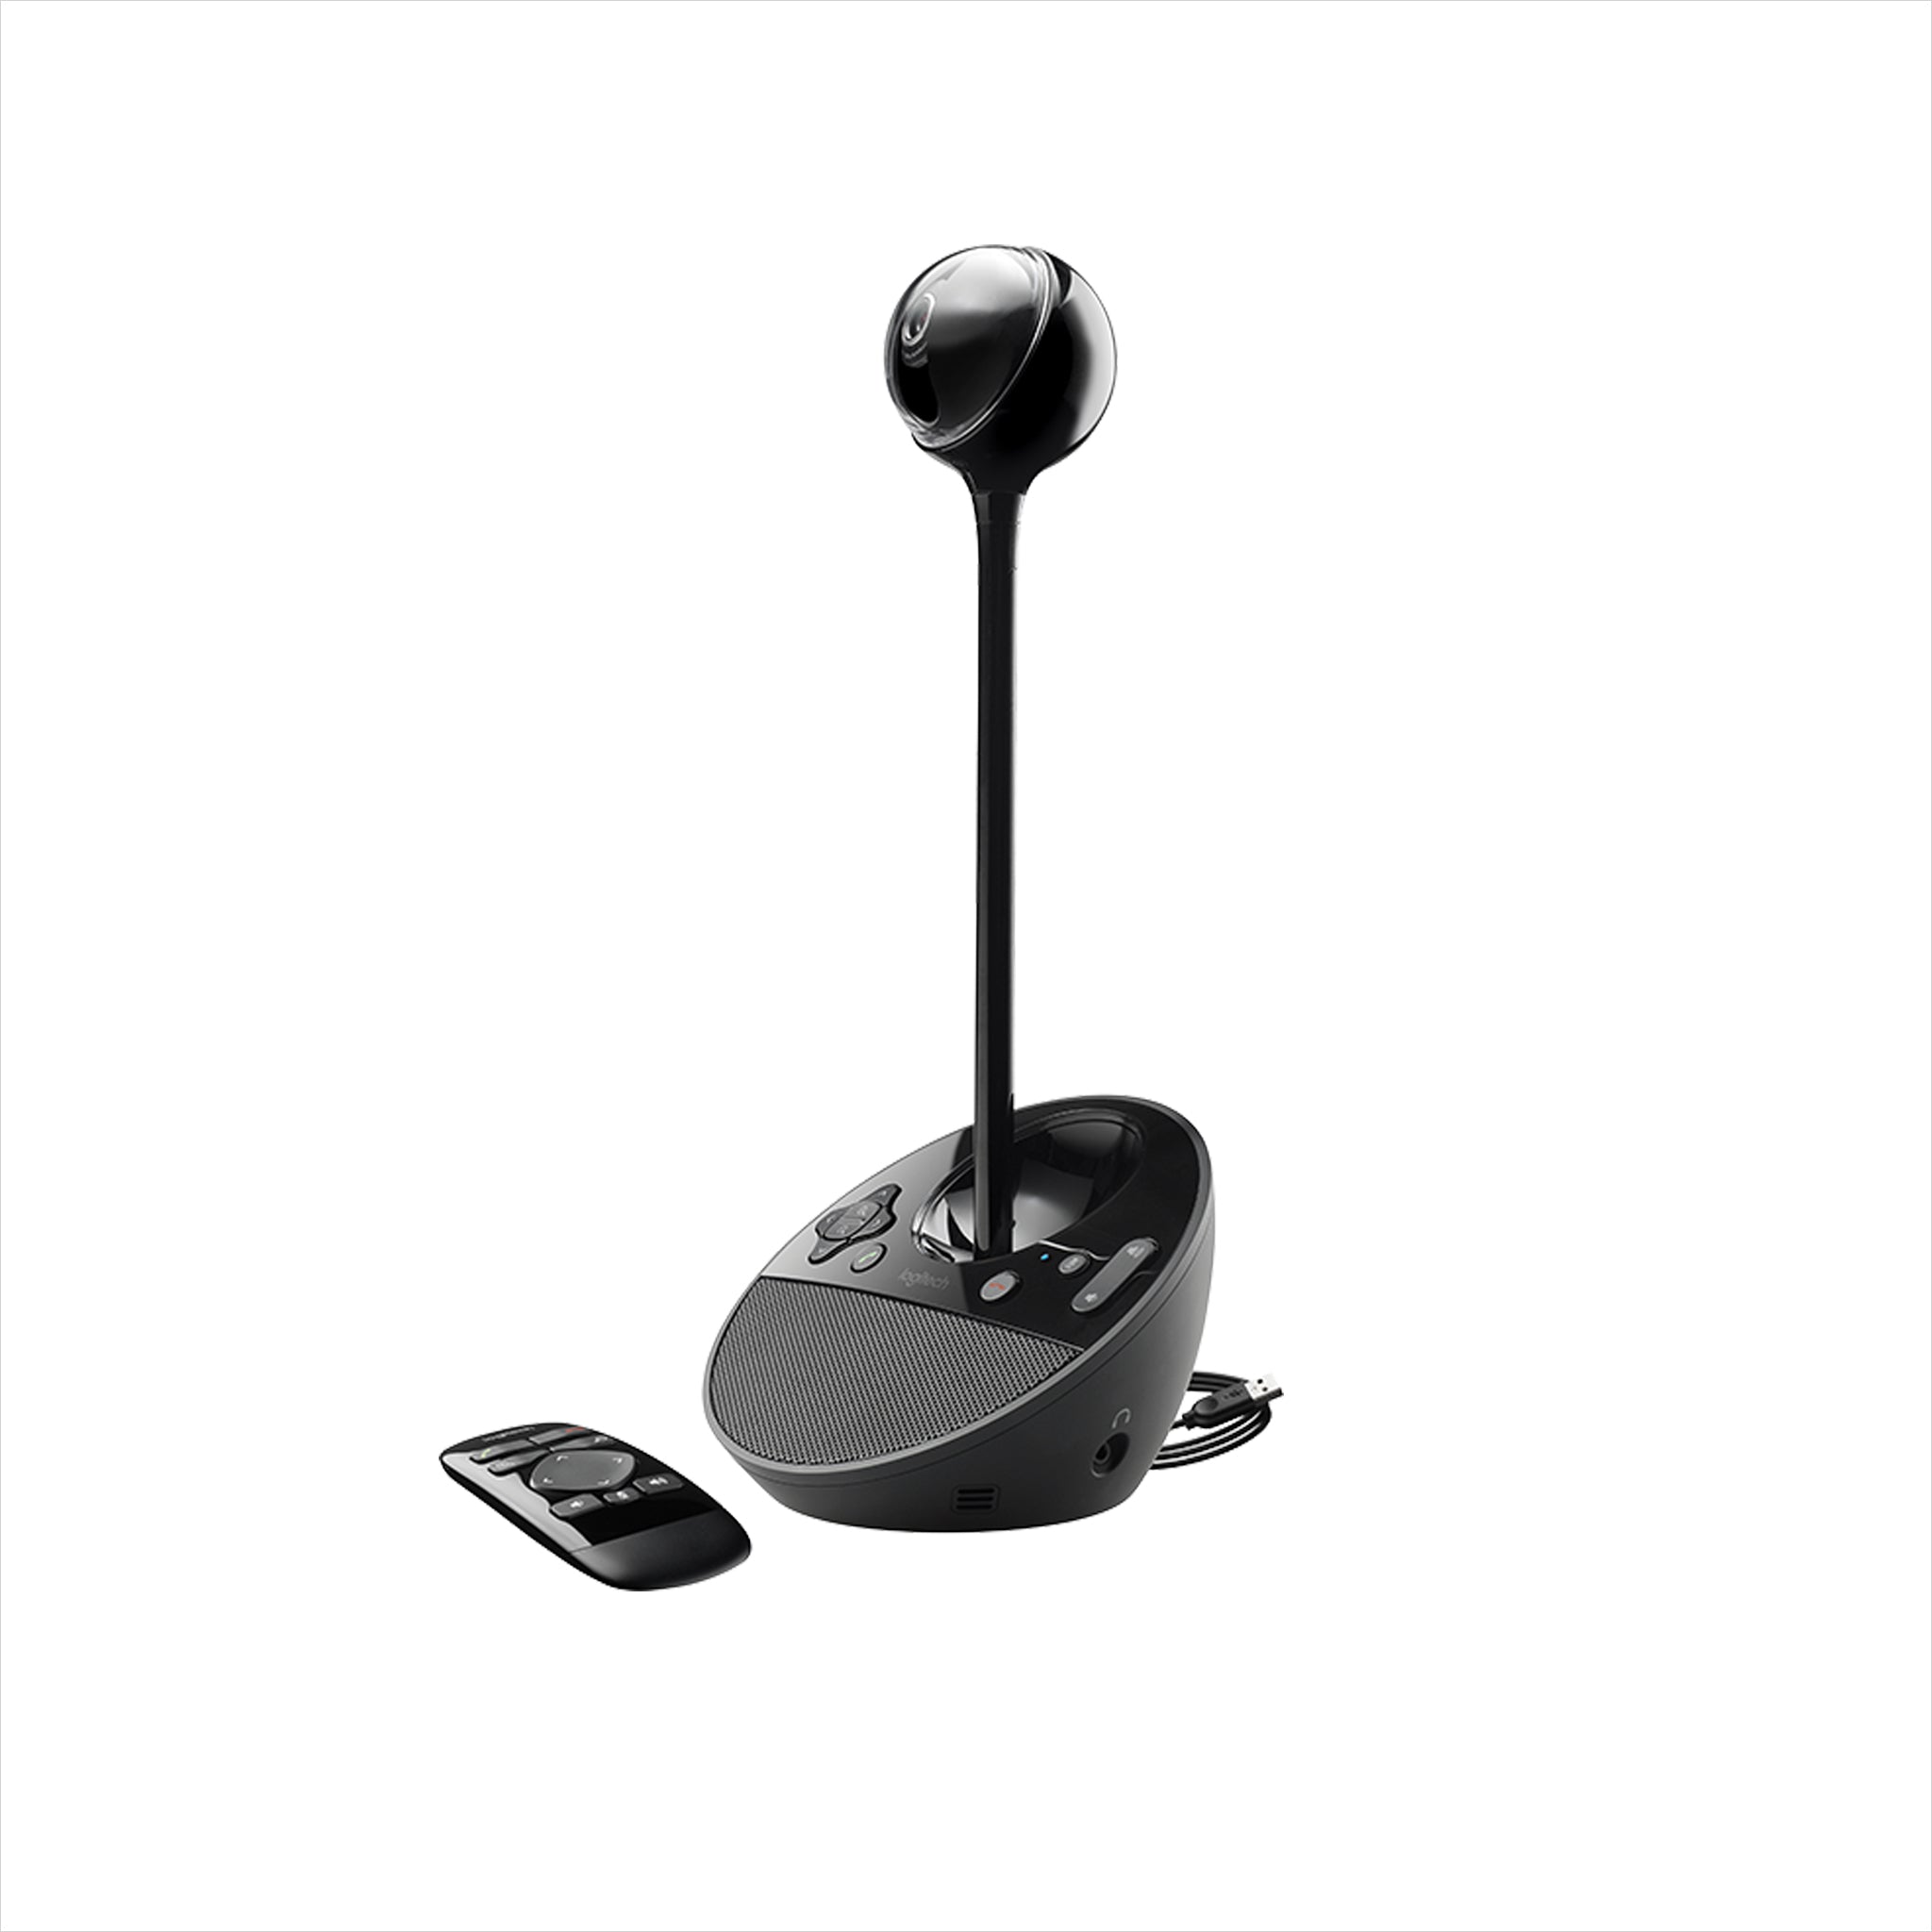 Logitech BCC950 - Desktop Video Conferencing Cam, Full HD Video (1080p30), HD Zoom 1.2x, For Small Spaces | AL-VoIP Store